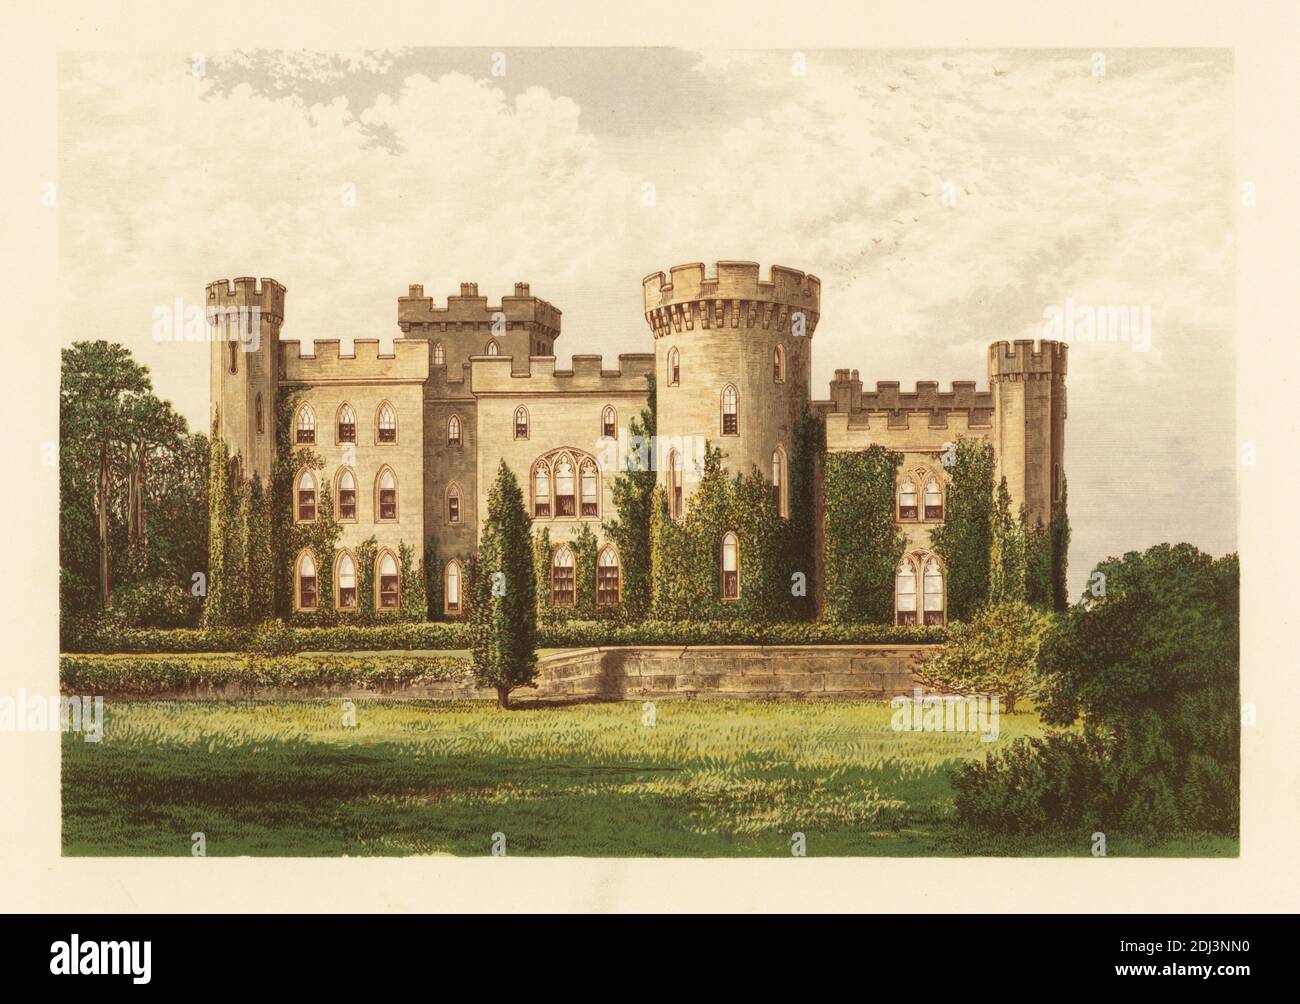 Cholmondeley Castle, Cheshire, England. Gothic-style crenellated house built by William Turner in 1801 remodelled by Robert Smirke for George Cholmondeley, 1st Marquess of Cholmondeley. Colour woodblock by Benjamin Fawcett in the Baxter process of an illustration by Alexander Francis Lydon from Reverend Francis Orpen Morris’s Picturesque Views of the Seats of Noblemen and Gentlemen of Great Britain and Ireland, William Mackenzie, London, 1880. Stock Photo